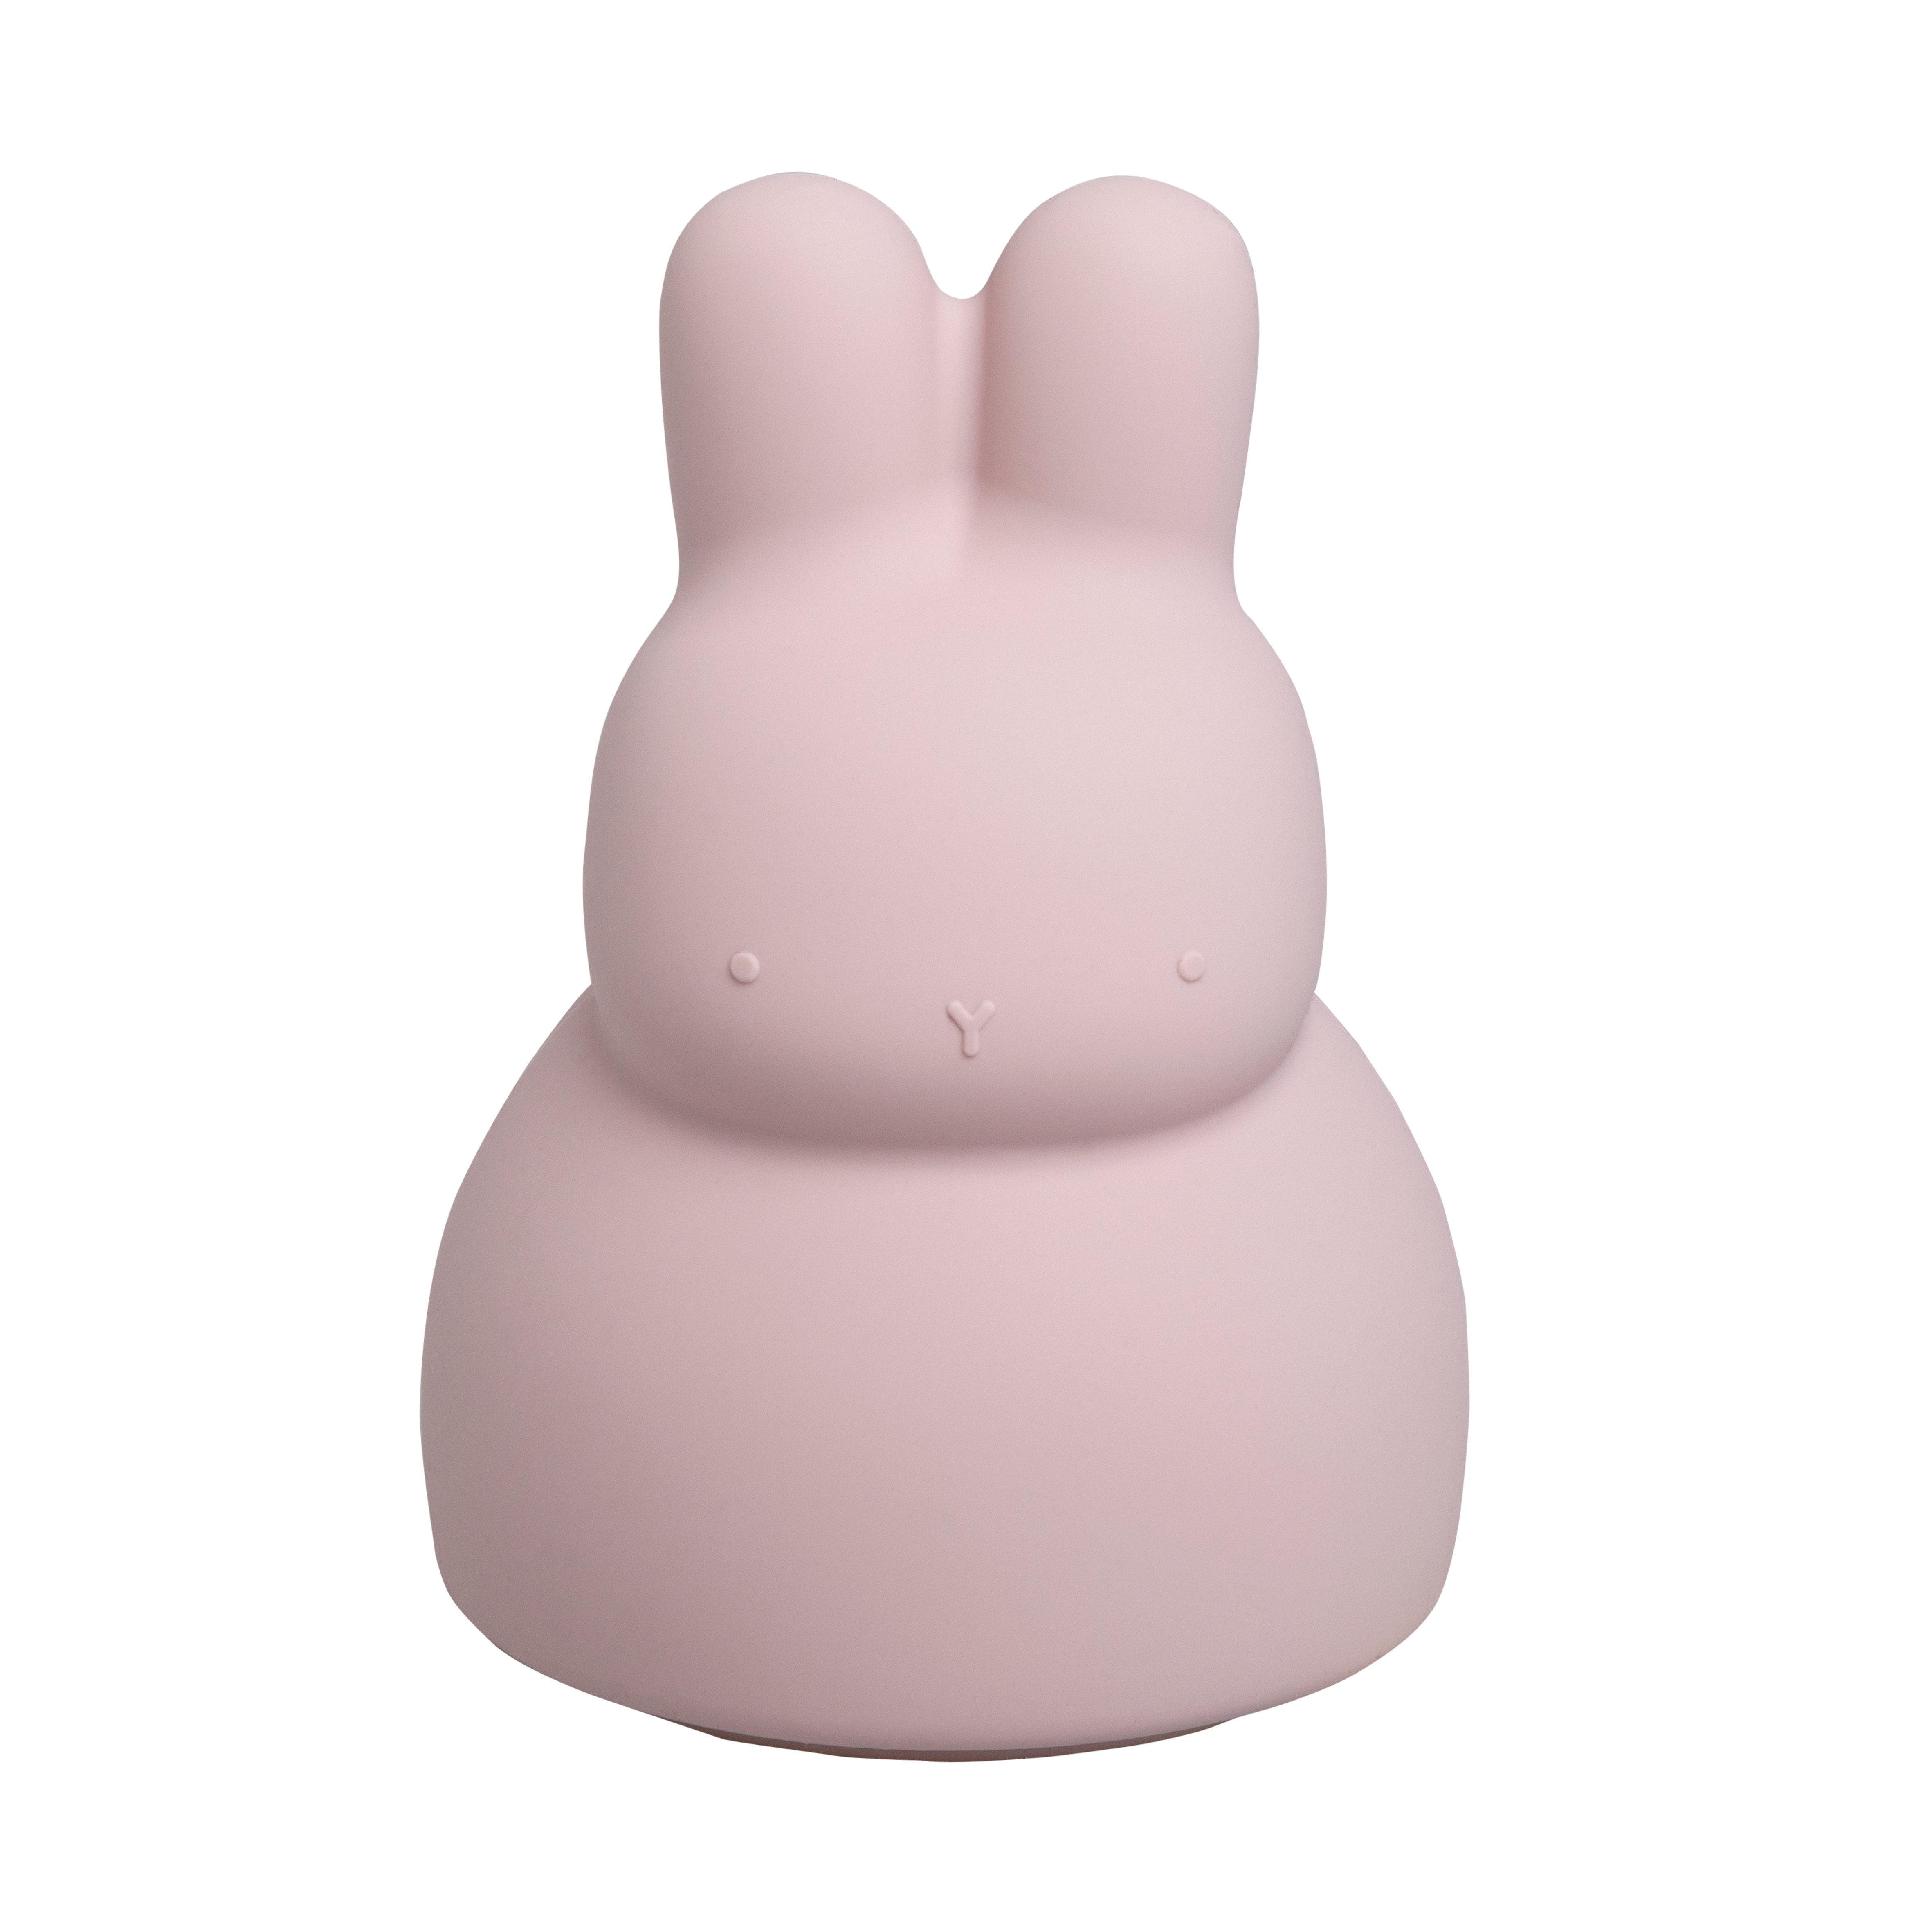 Night light rabbit old pink - With Music